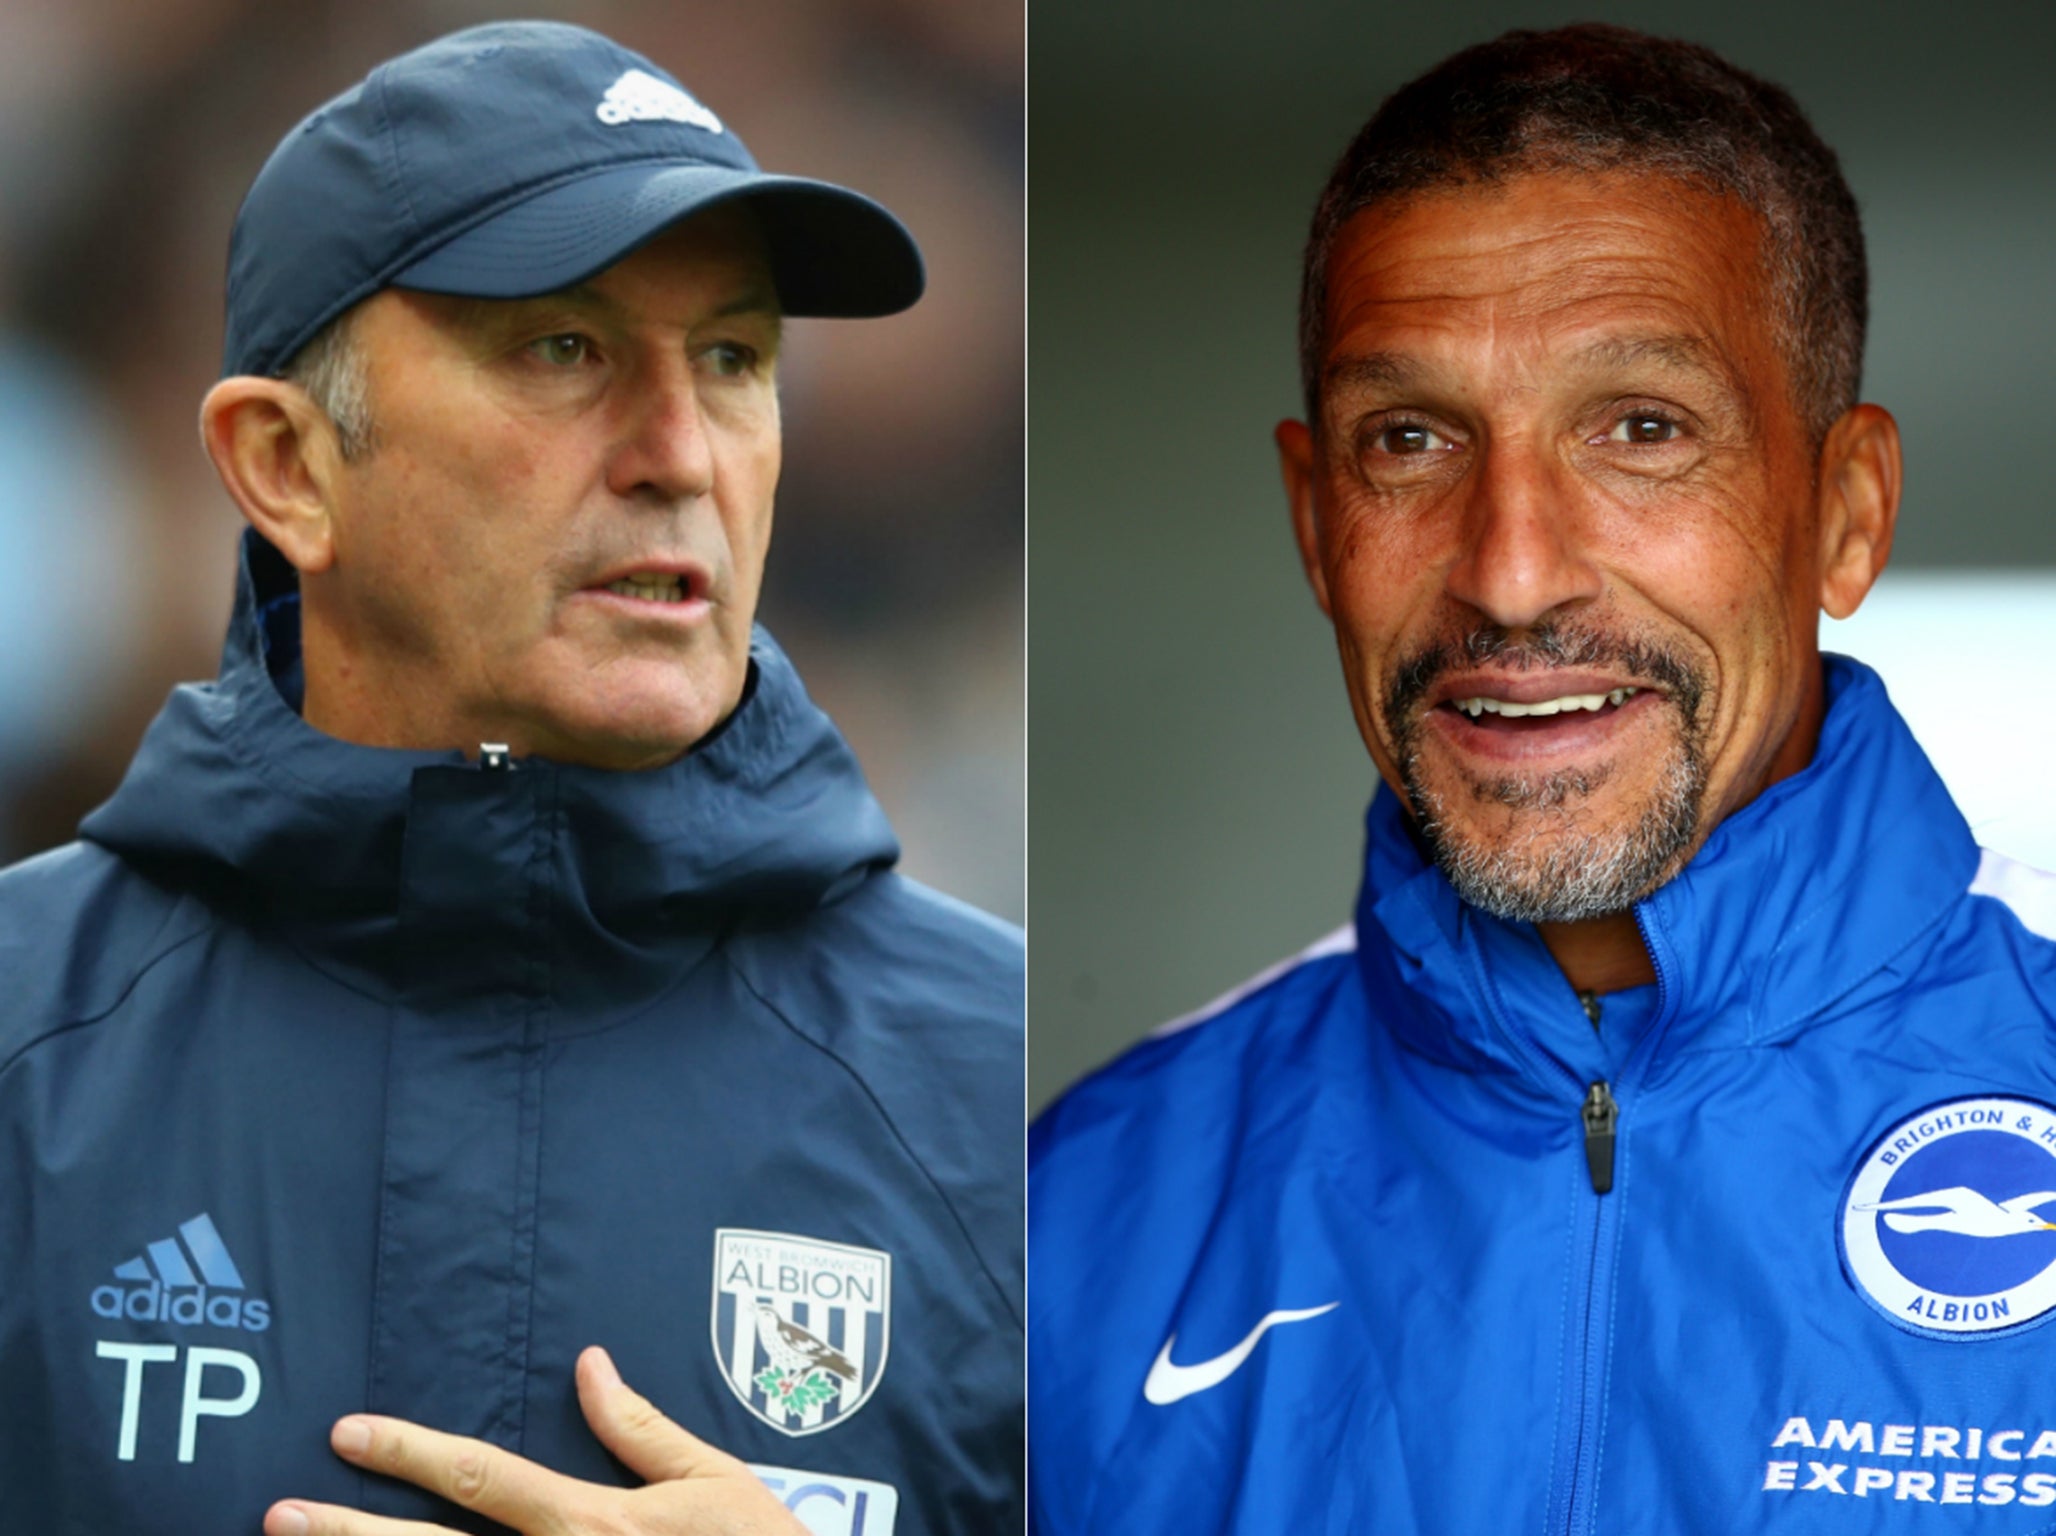 West Brom have made a superb start to the season